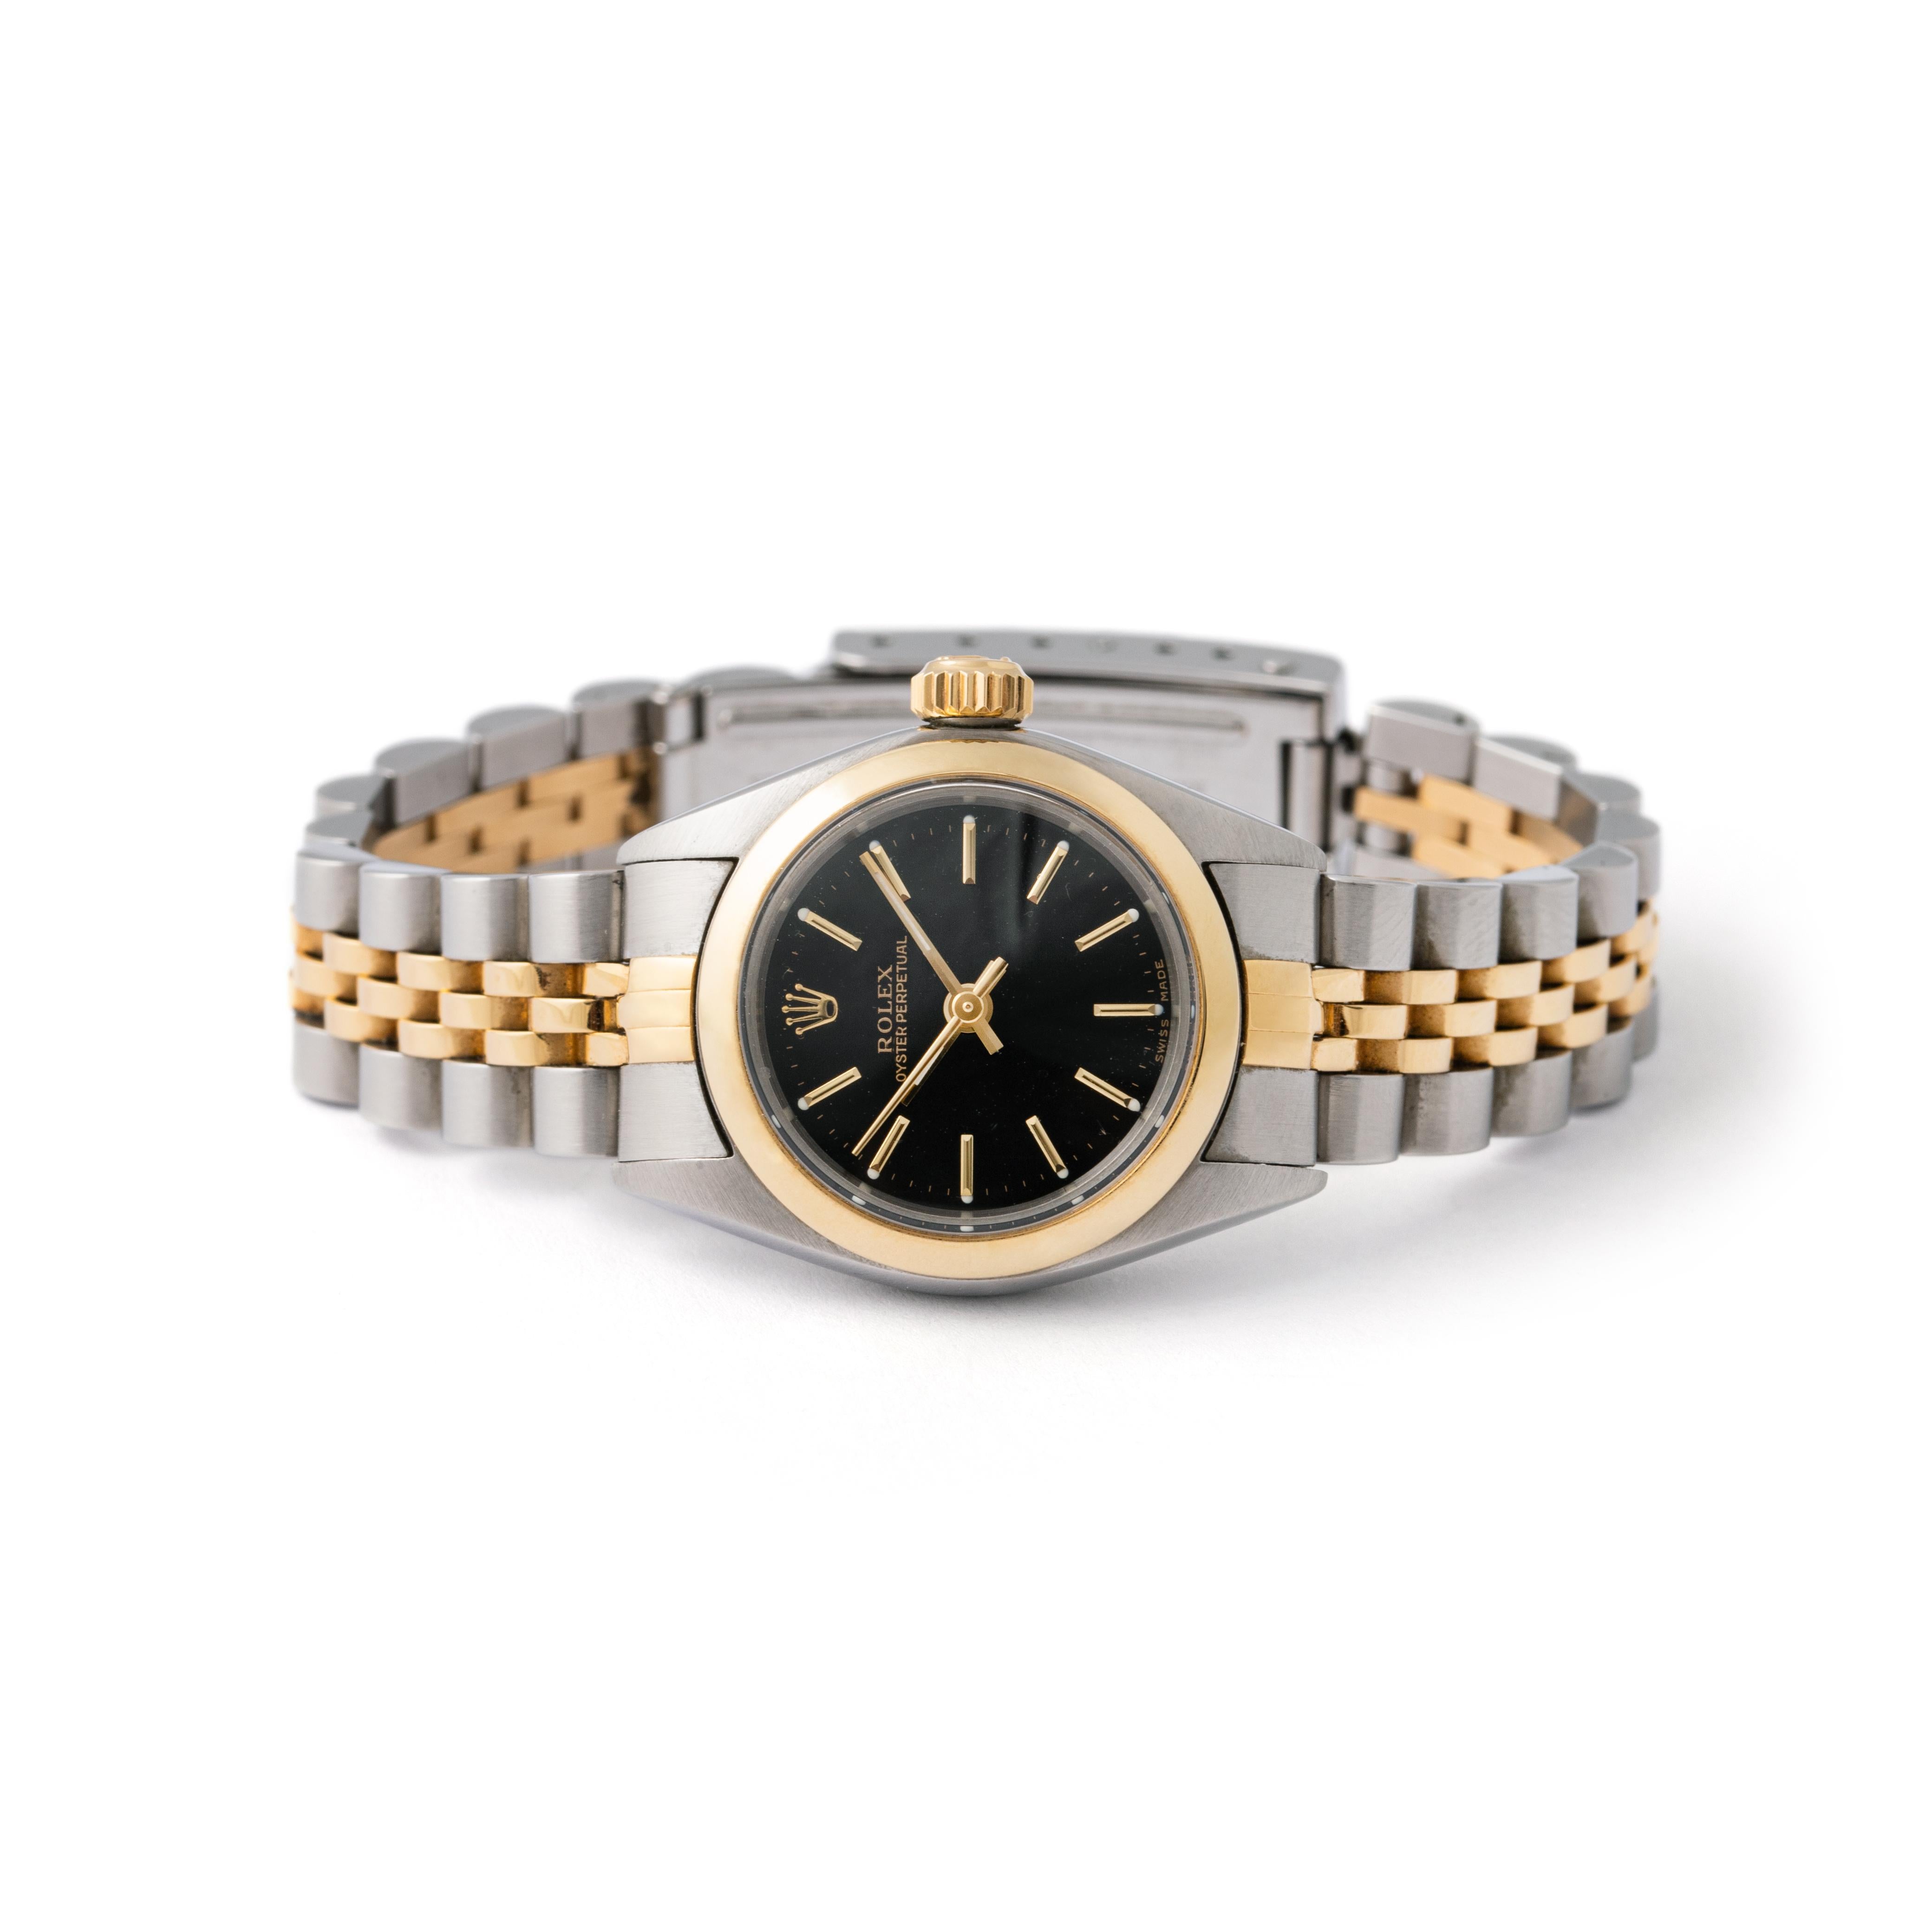 Rolex Lady Oyster Perpetual Yellow Gold 18K and Steel.
Case diameter: 26 mm.
Wrist length: approximately 15.70 centimeters.
Total weight: 49.38 grams.

We do not guarantee the functioning of this watch.
Please note that the movement has not been